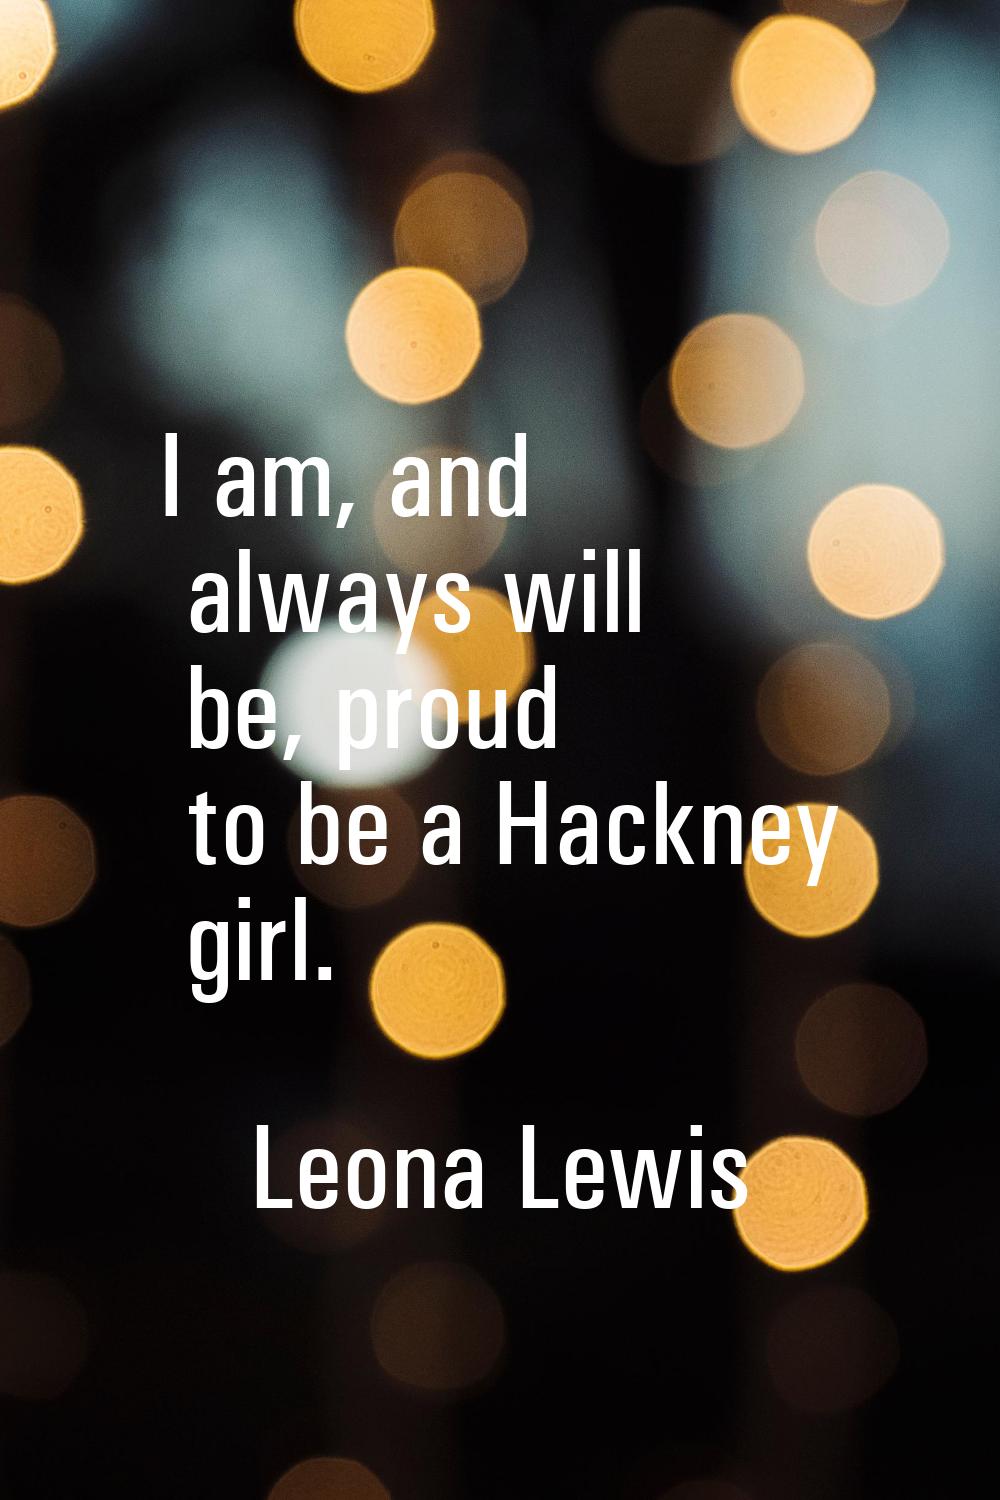 I am, and always will be, proud to be a Hackney girl.